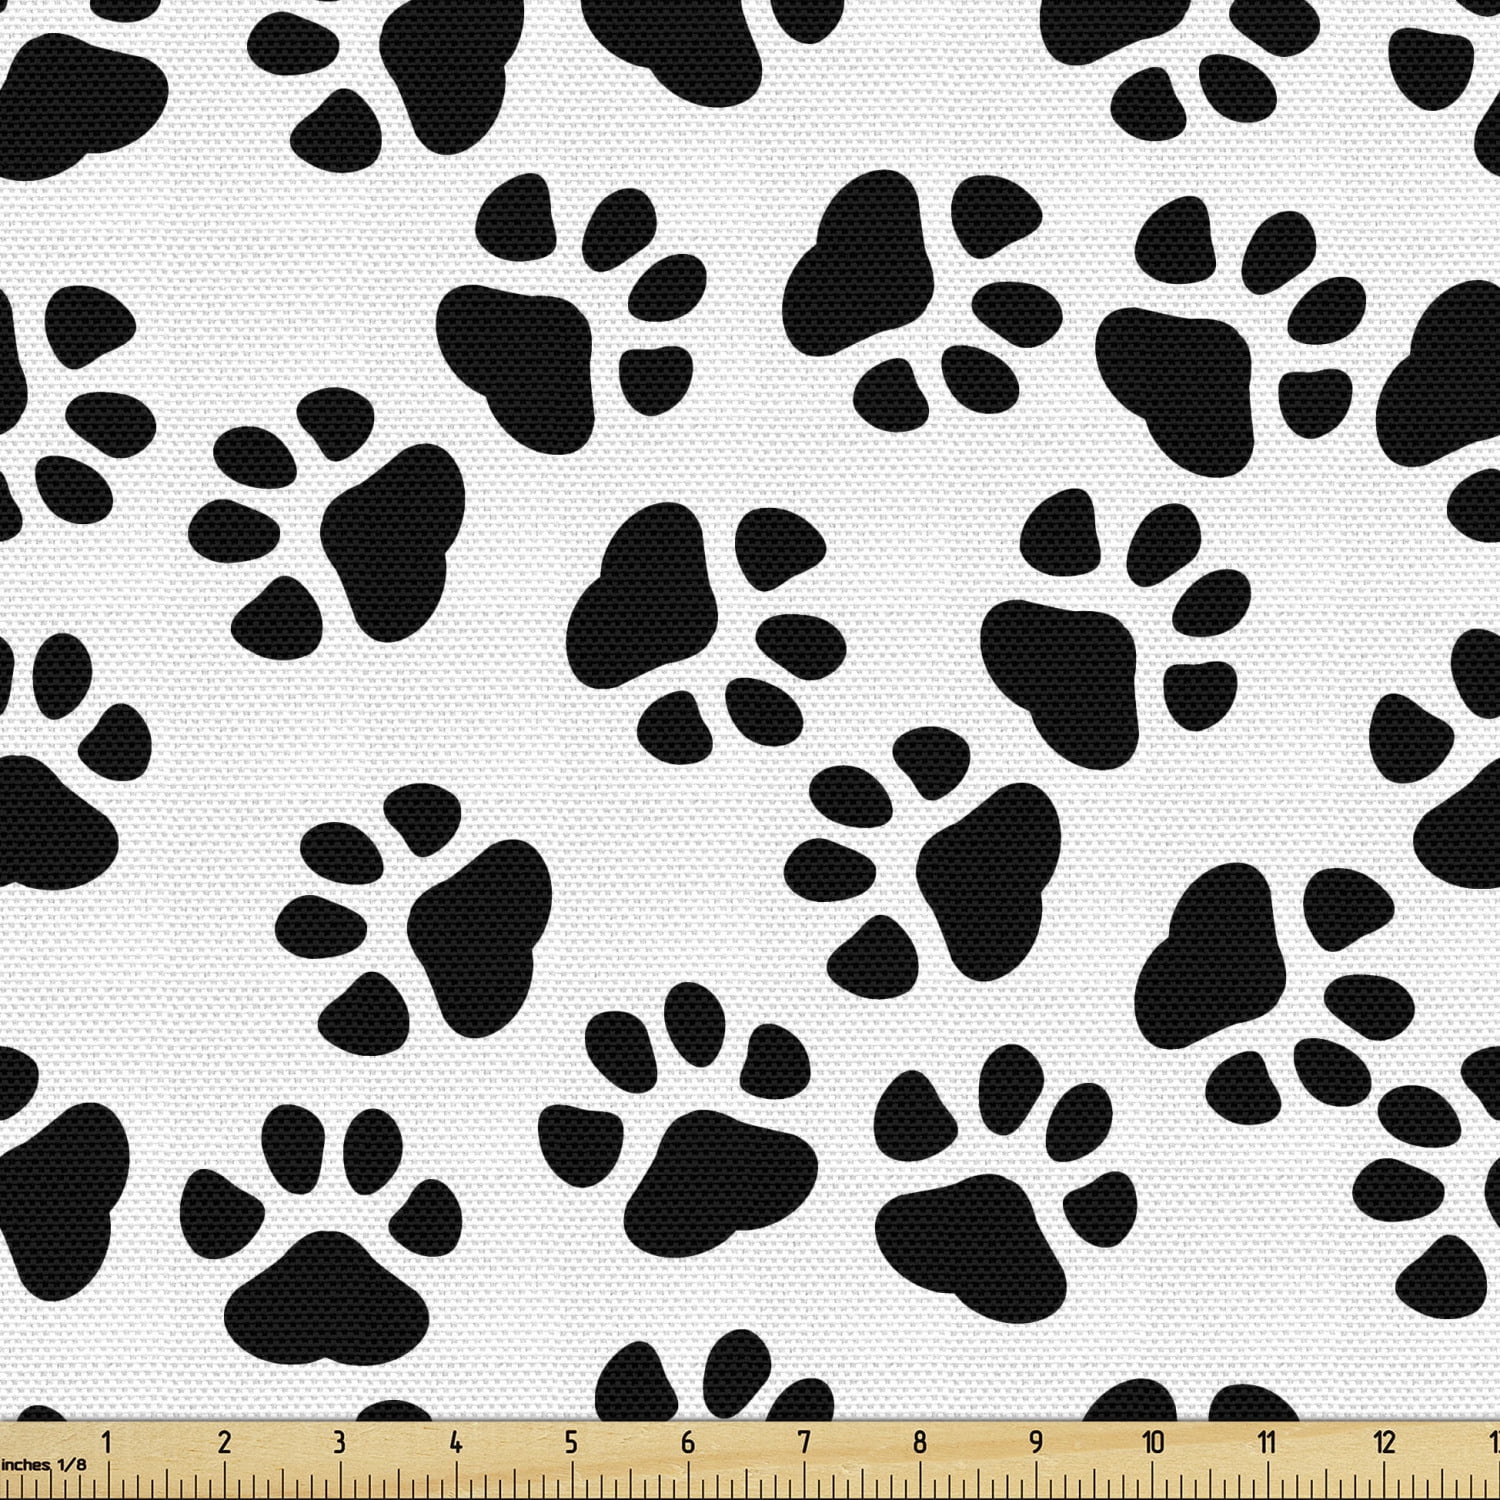 Puppies Nursery Fabric The Highest Quality Cloth For Baby Cute Dogs Cotton Fabric Premium Textile